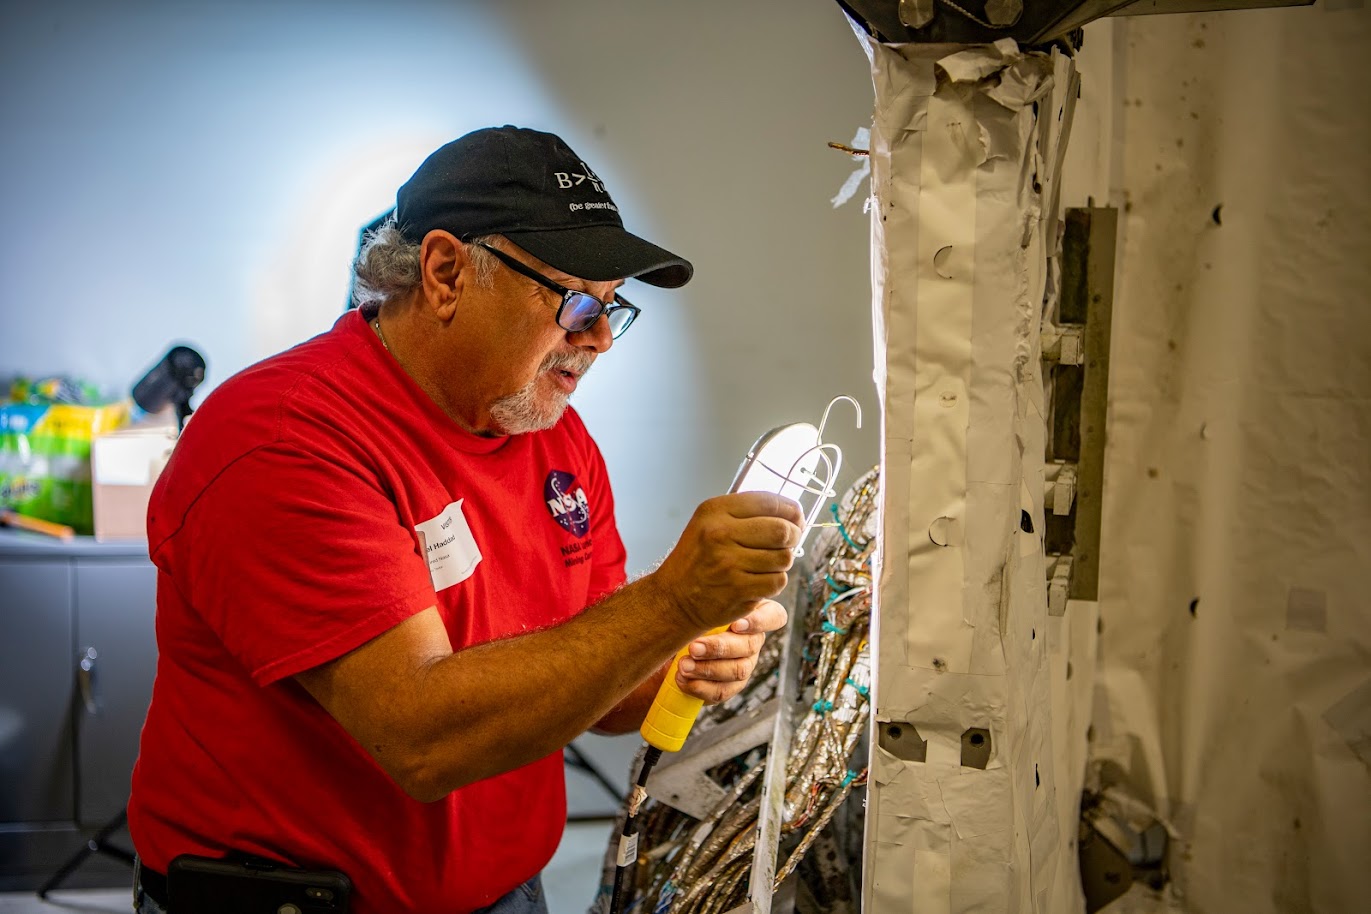 Retired NASA engineer Mike Haddad inspects the Astro cruciform during refurbishment efforts at the U.S. Space & Rocket Center.